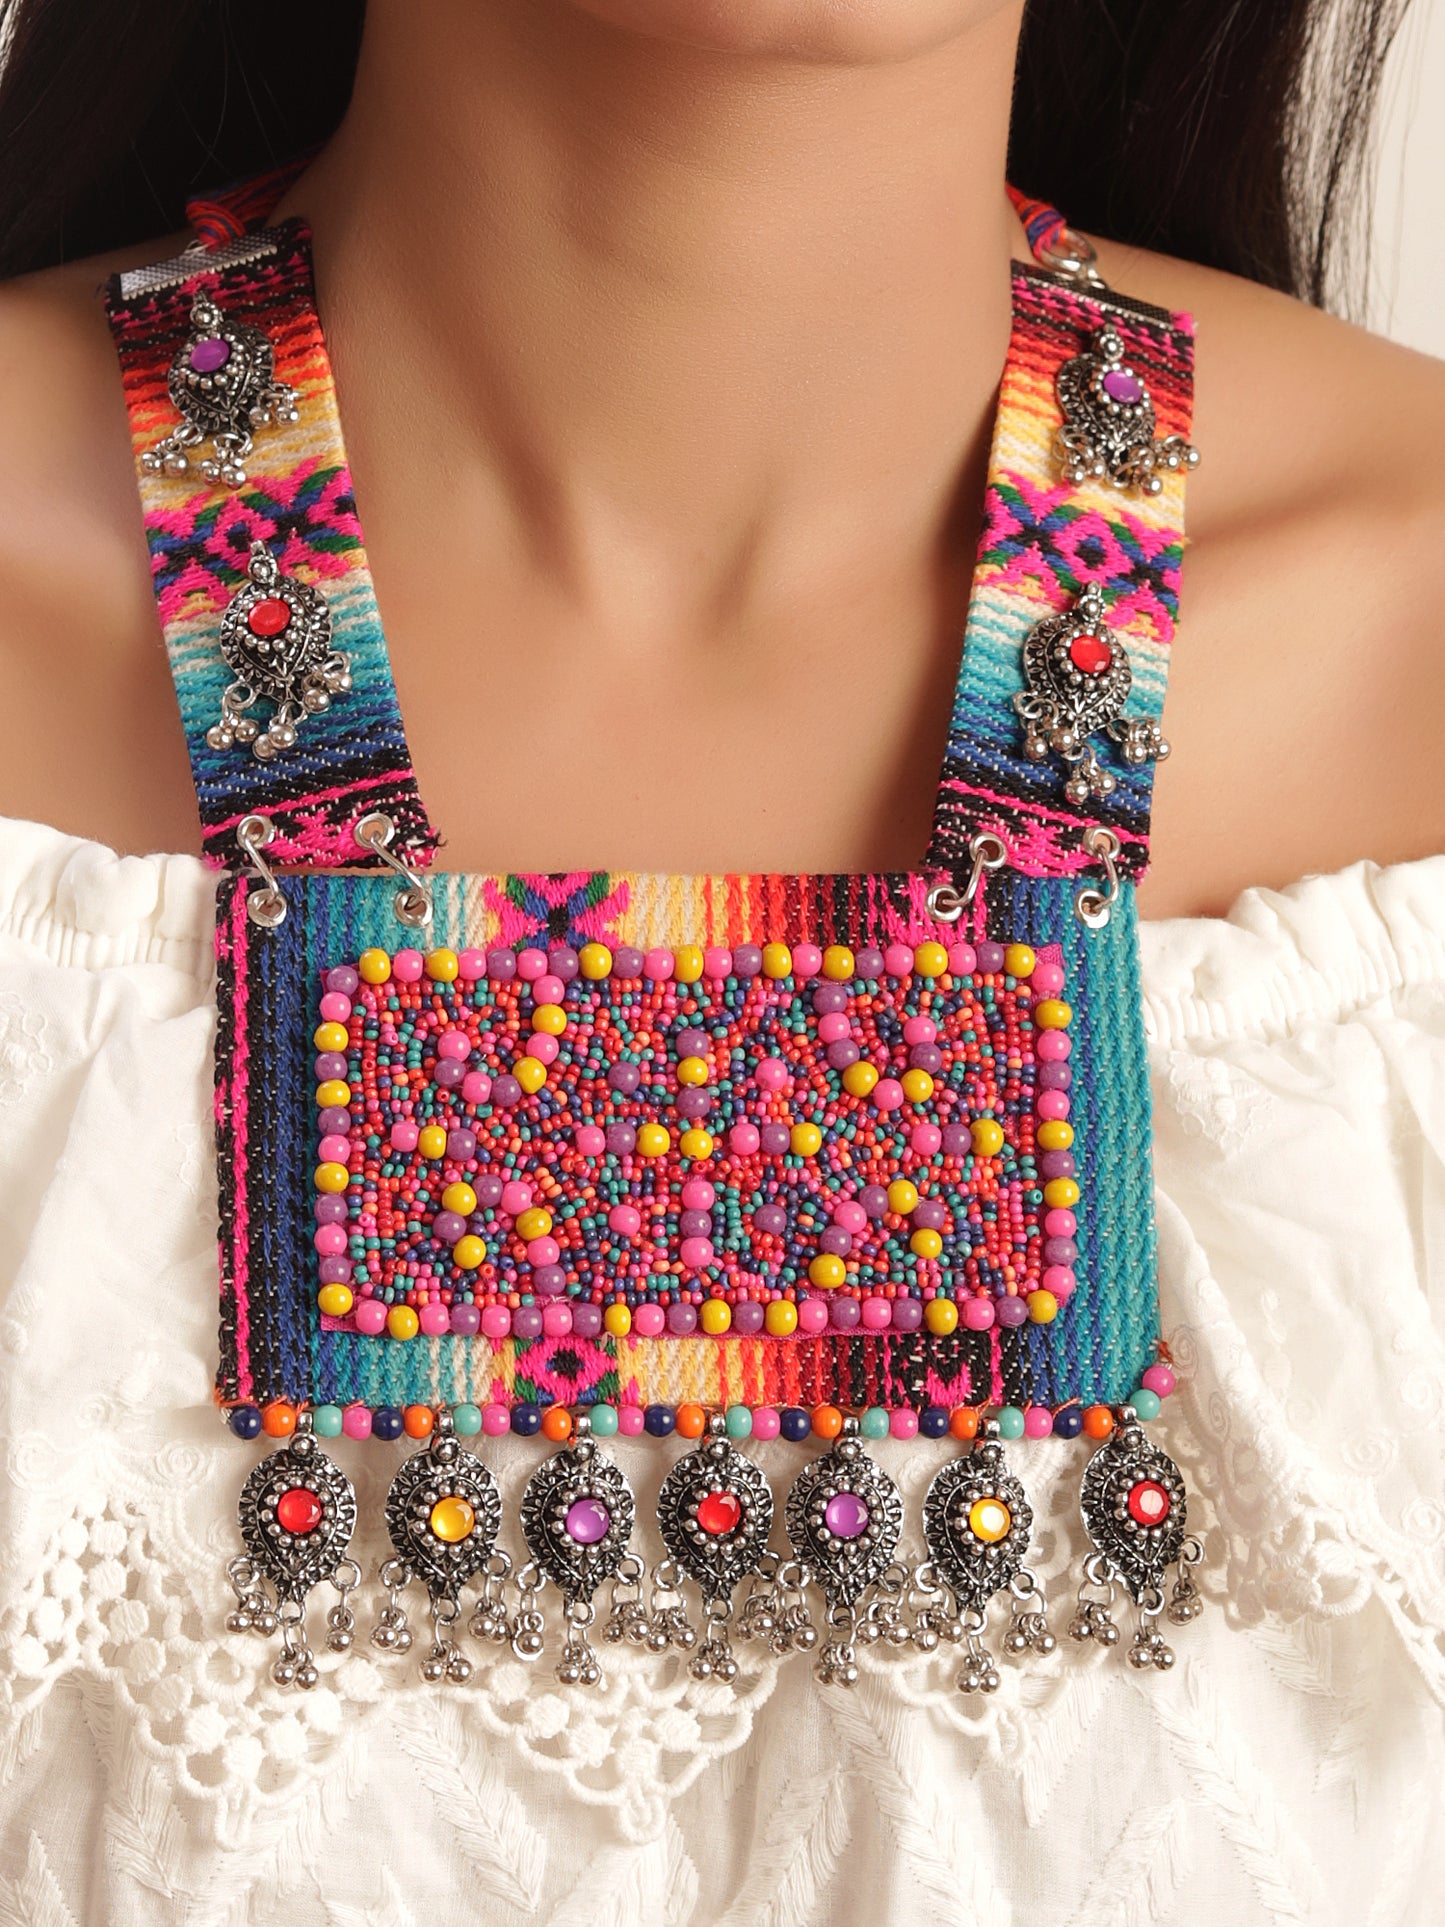 The Boho Pixelated Necklace Set in Multicolor